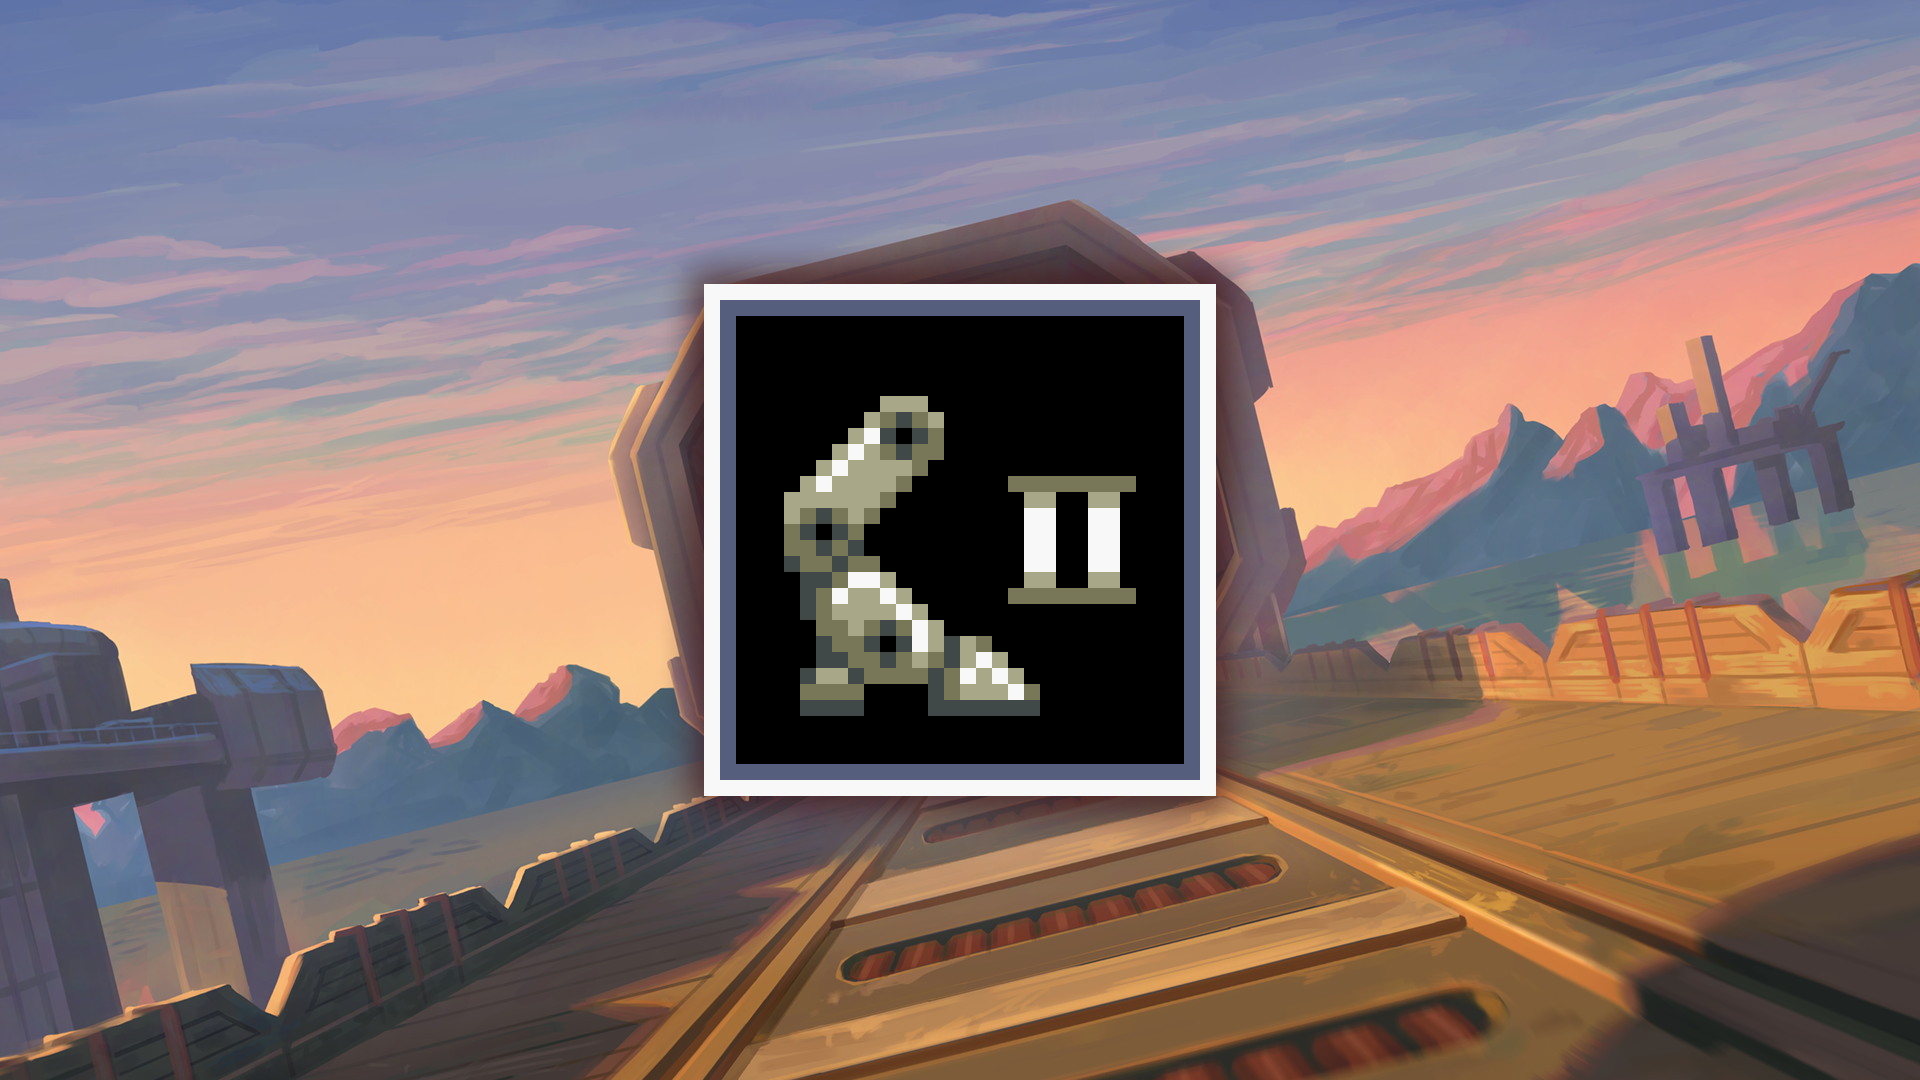 Icon for Mech Rider II